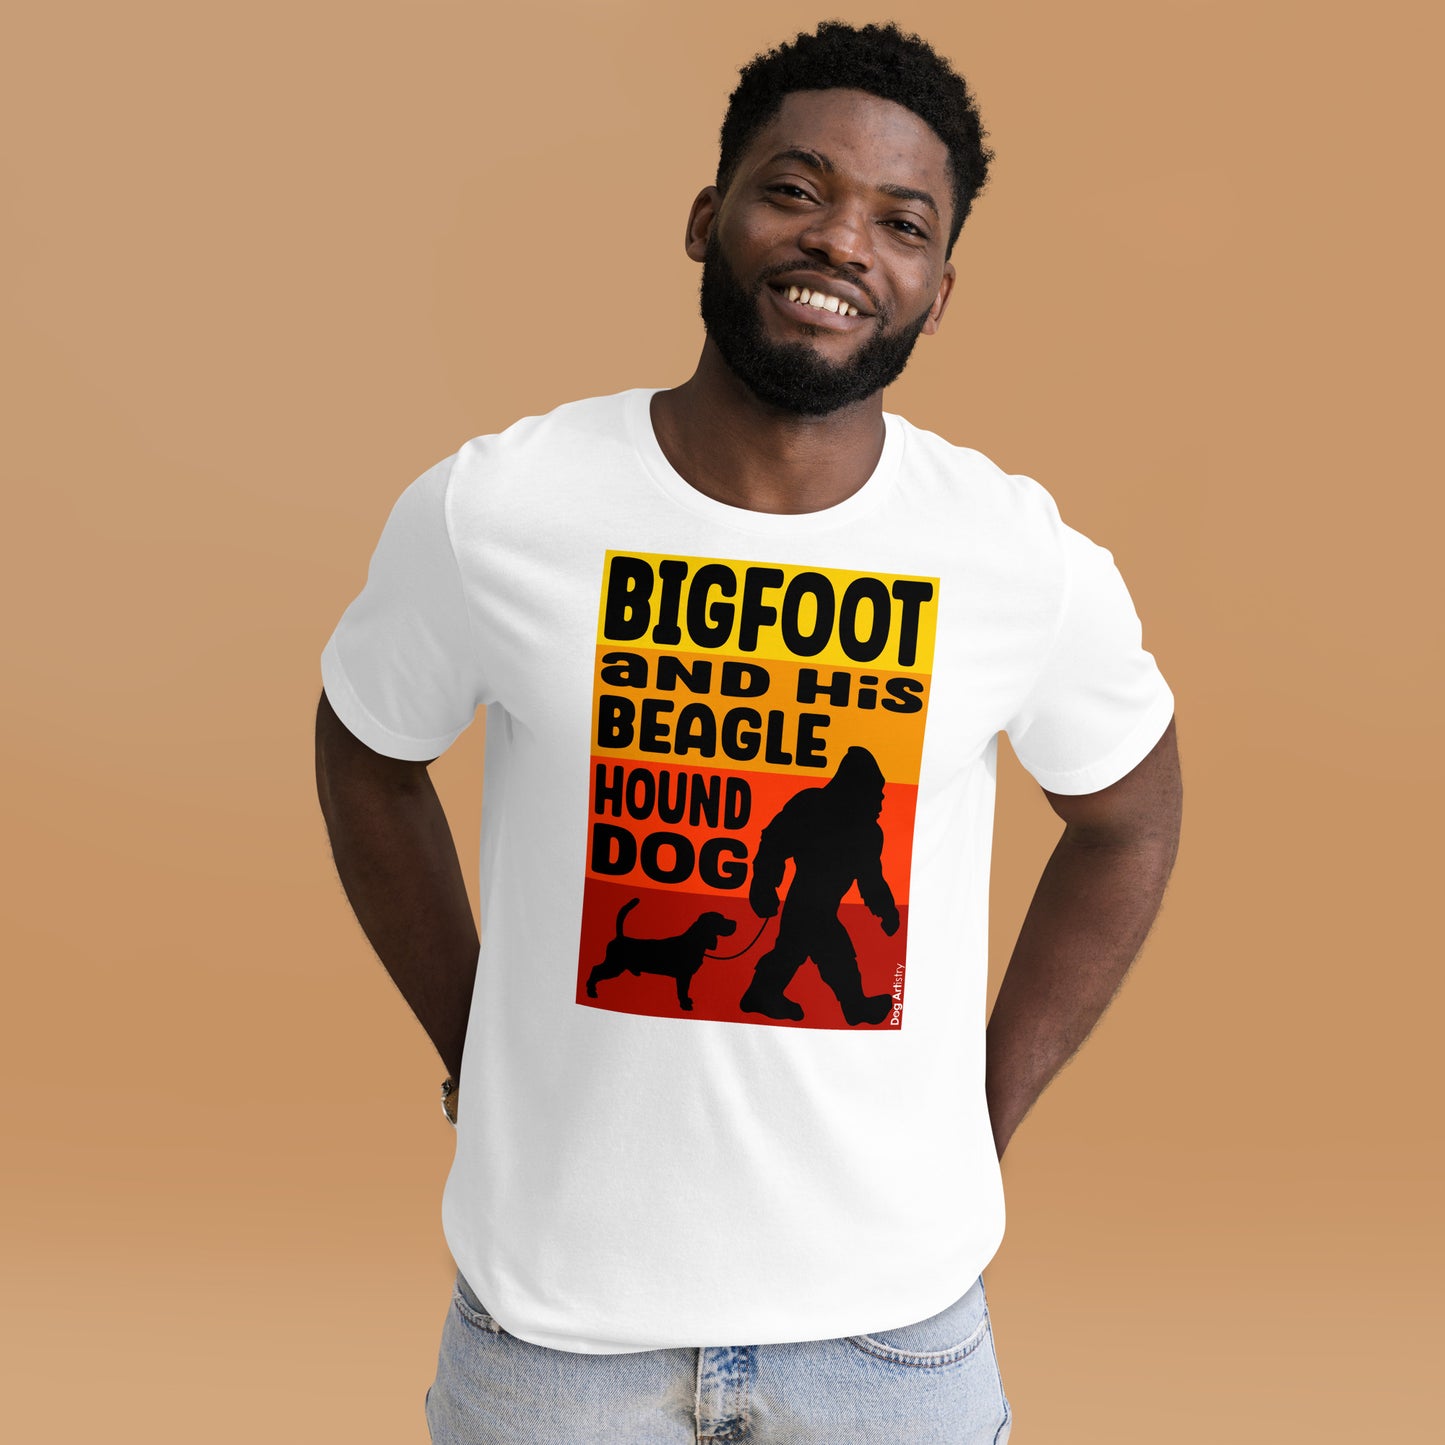 Big foot and his Beagle unisex white t-shirt by Dog Artistry.